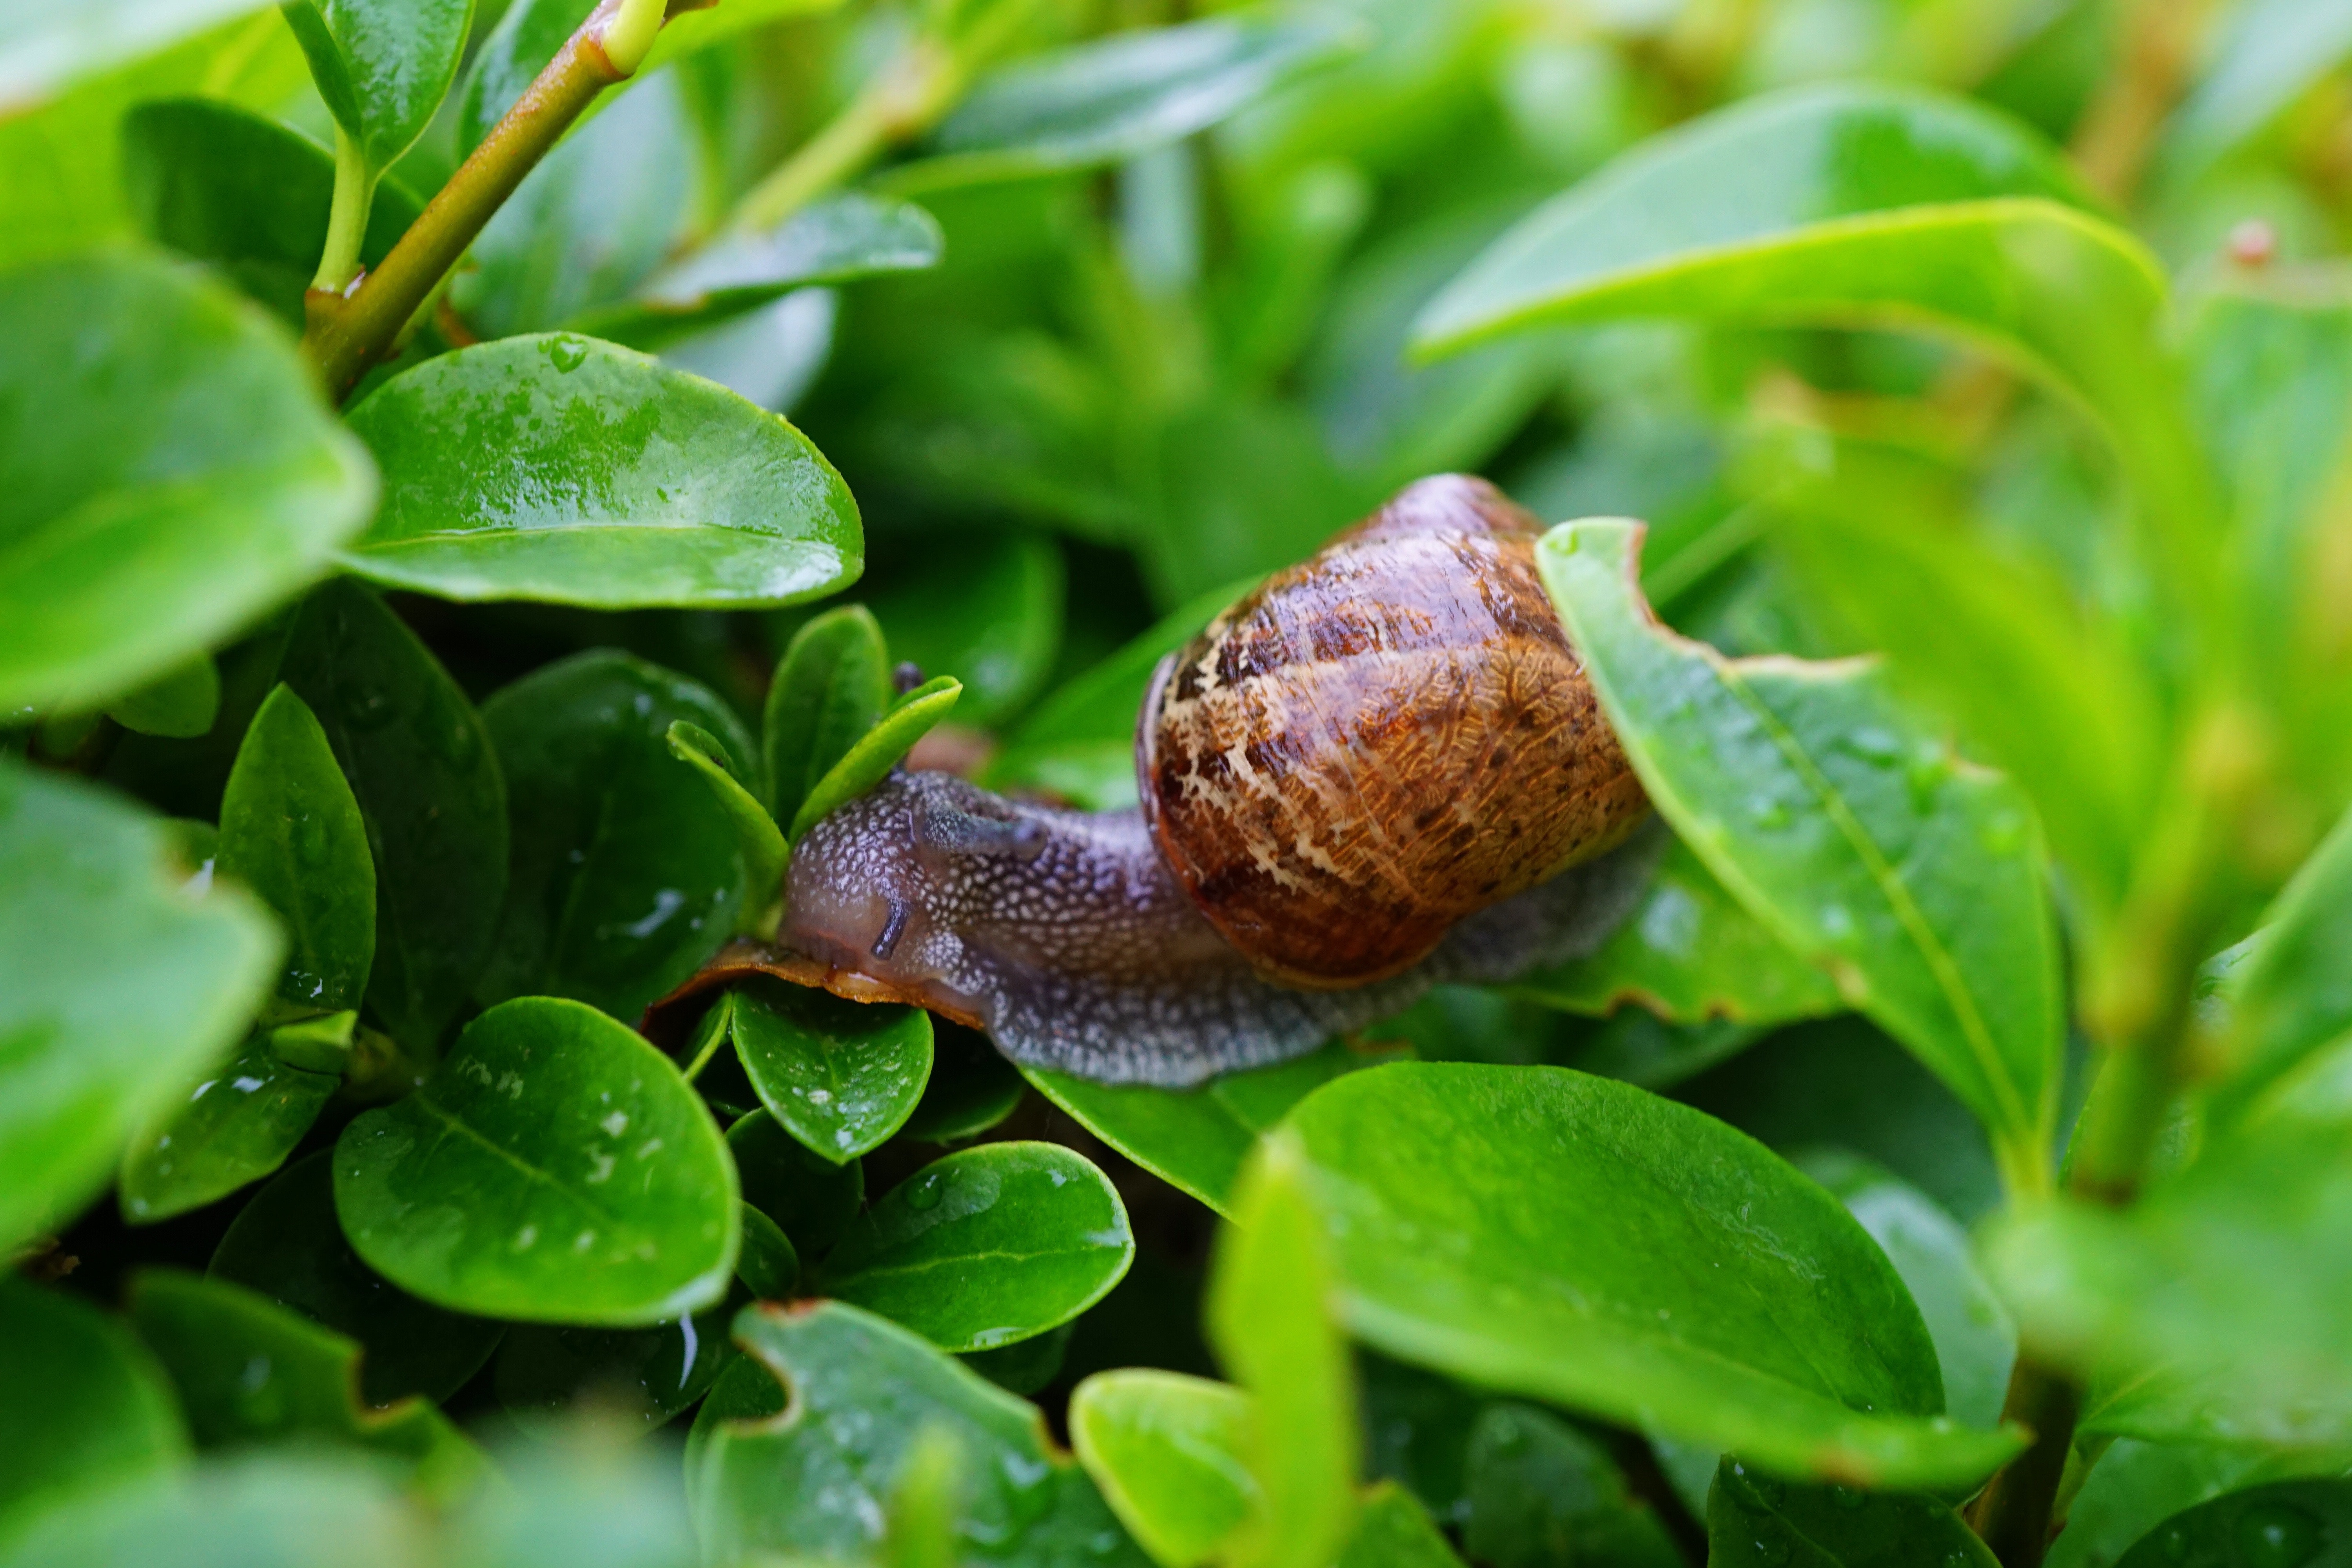 Snail on Green Leaf in Close Up Photography · Free Stock Photo